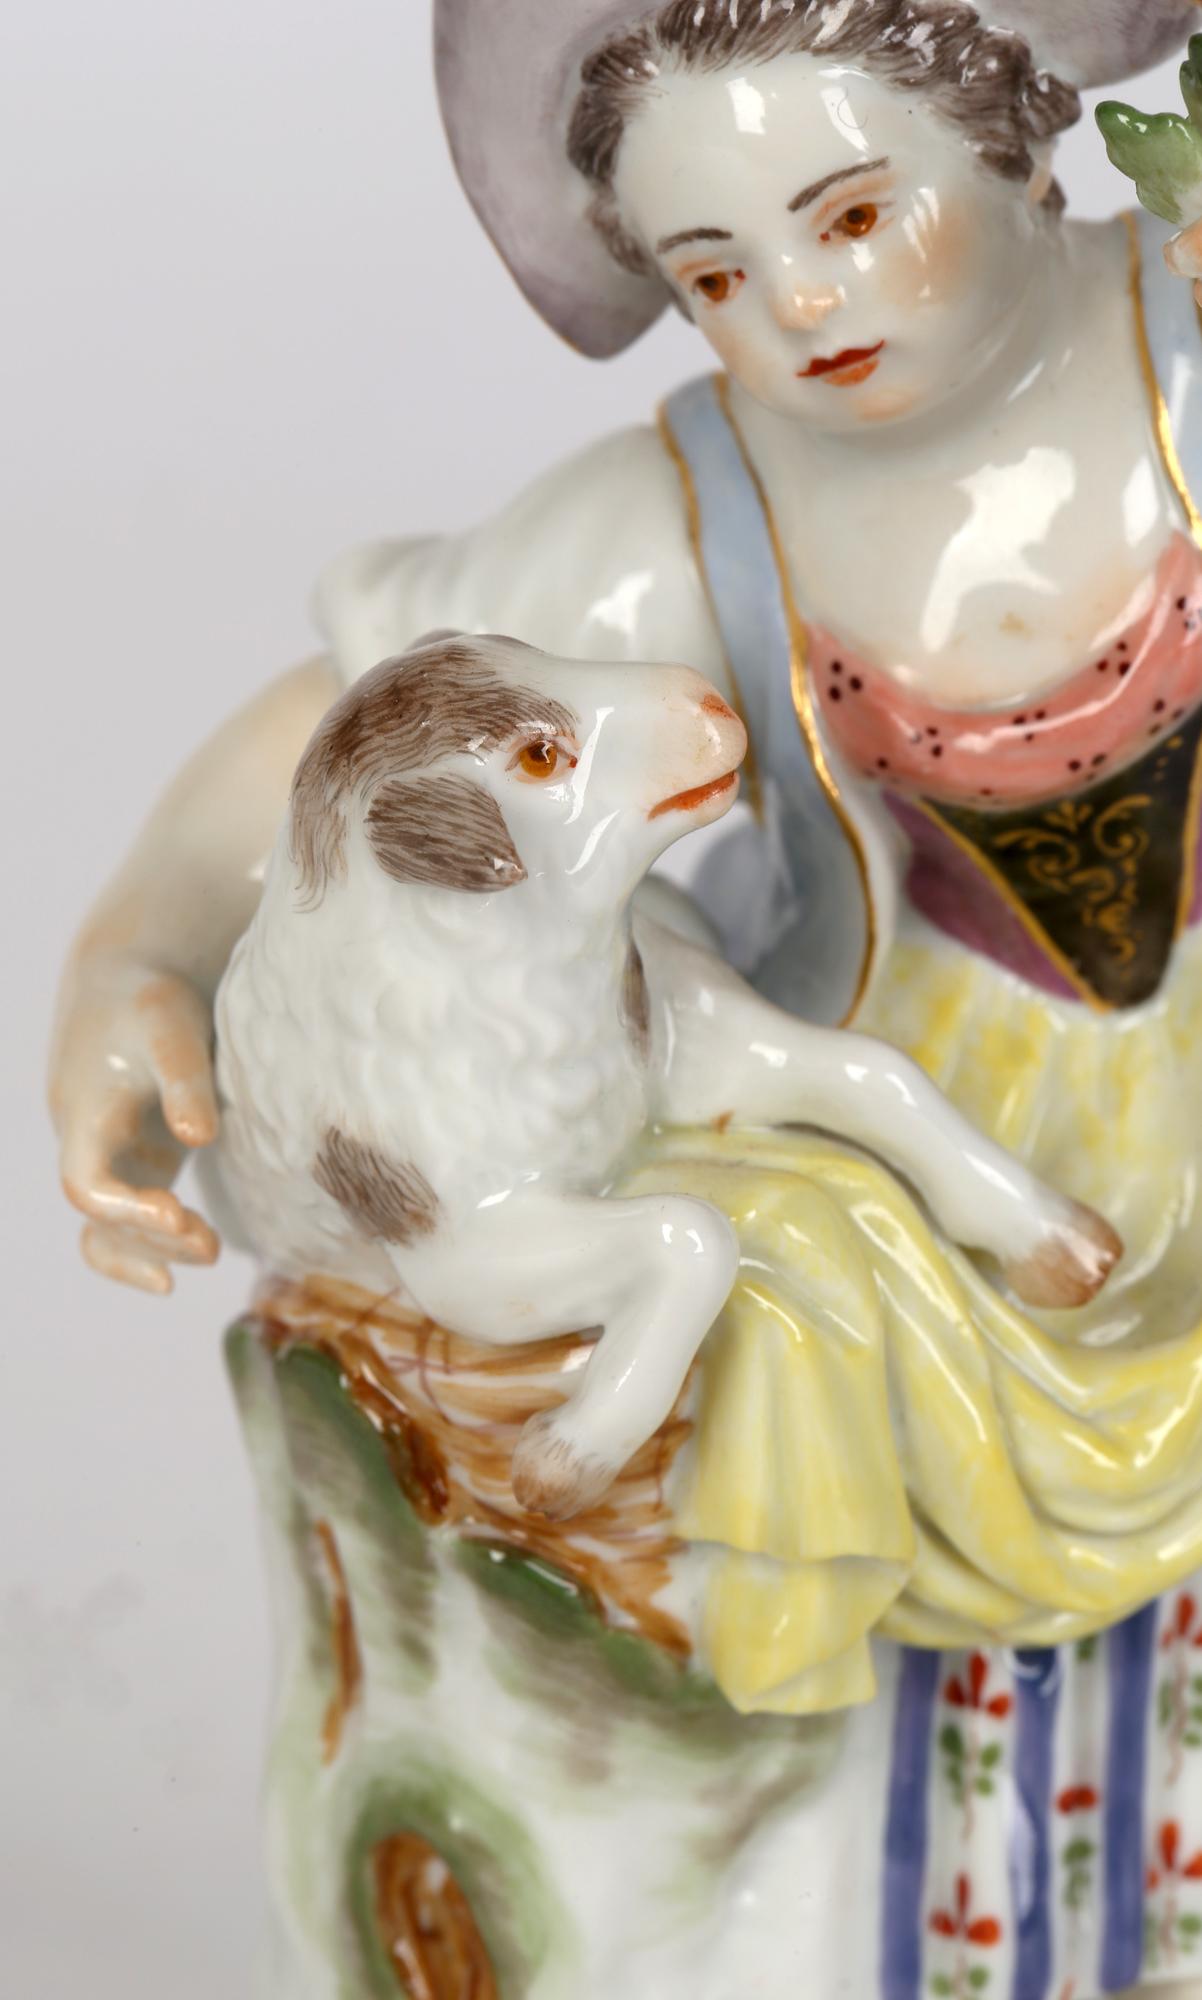 A fine and delightful German porcelain figurine of a girl feeding a sheep dating from the 19th or early 20th century. The figure stands on a scroll work rounded base decorated with relief molded gilded scrollwork. The girl is dressed in traditional